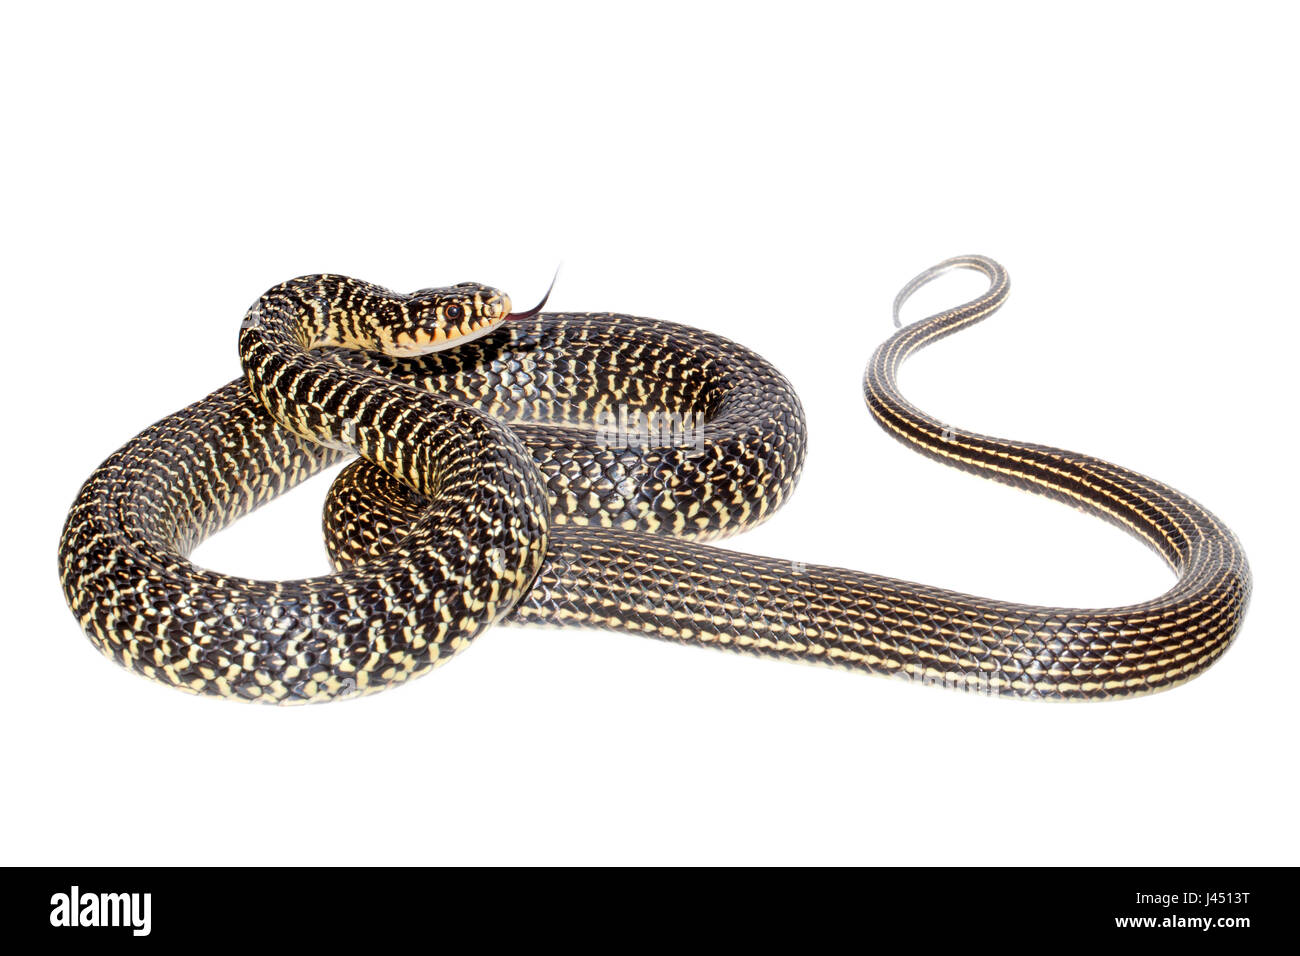 Western whip snake photographed on a white background Stock Photo